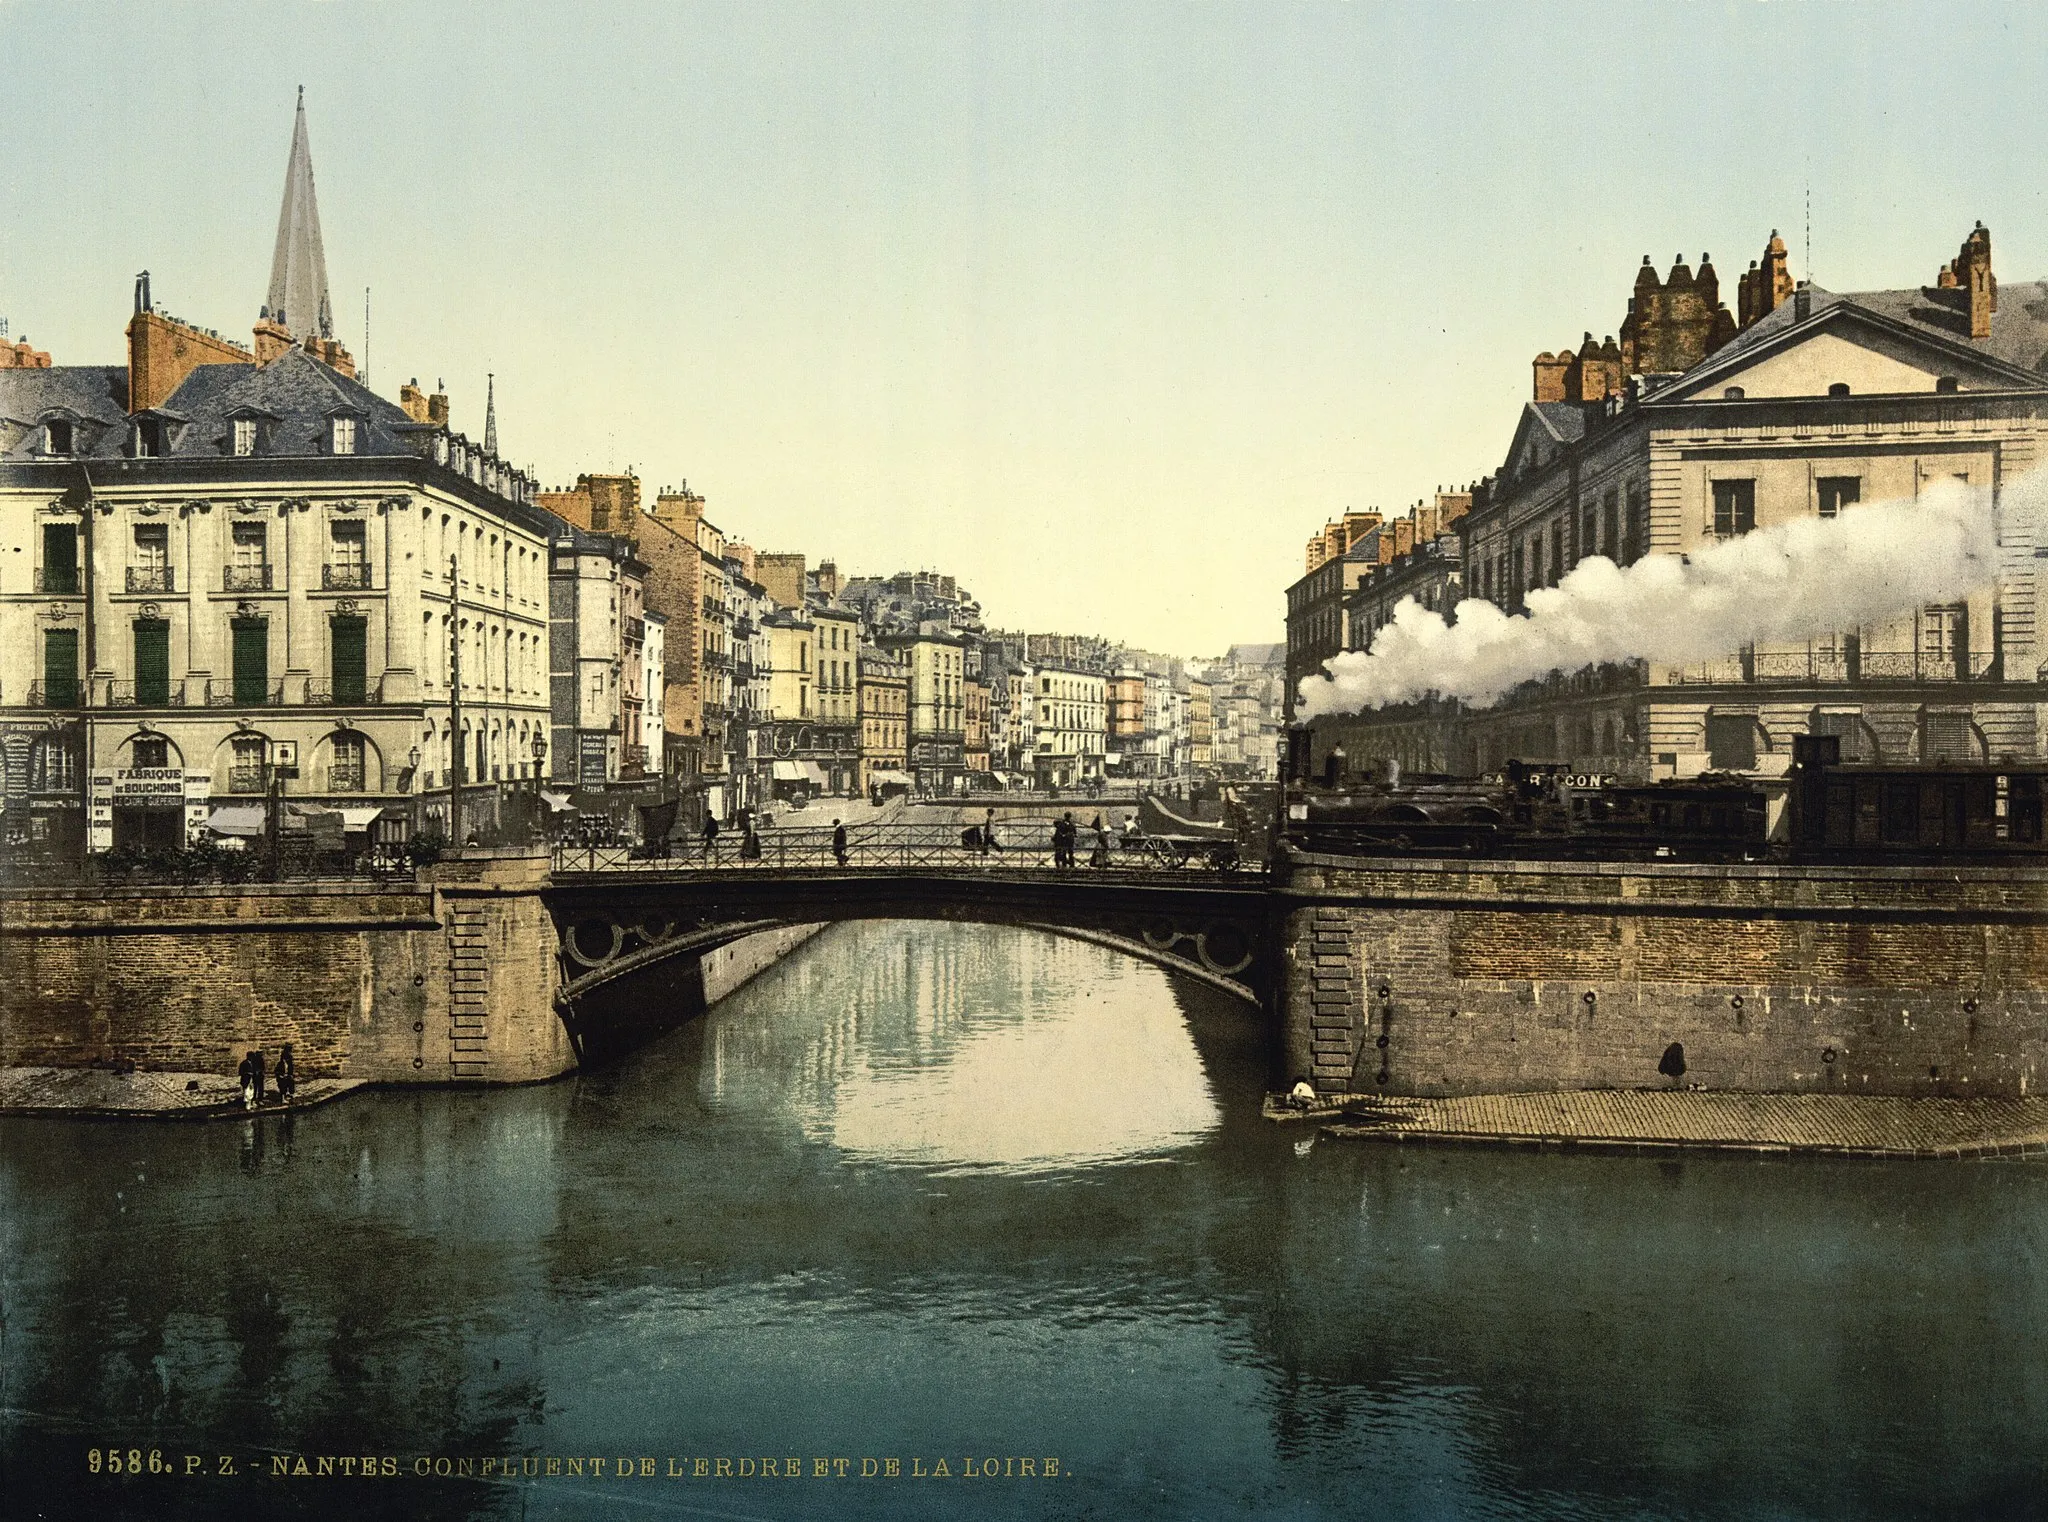 Photo showing: Confluence of Erdre and Loire rivers in Nantes, France